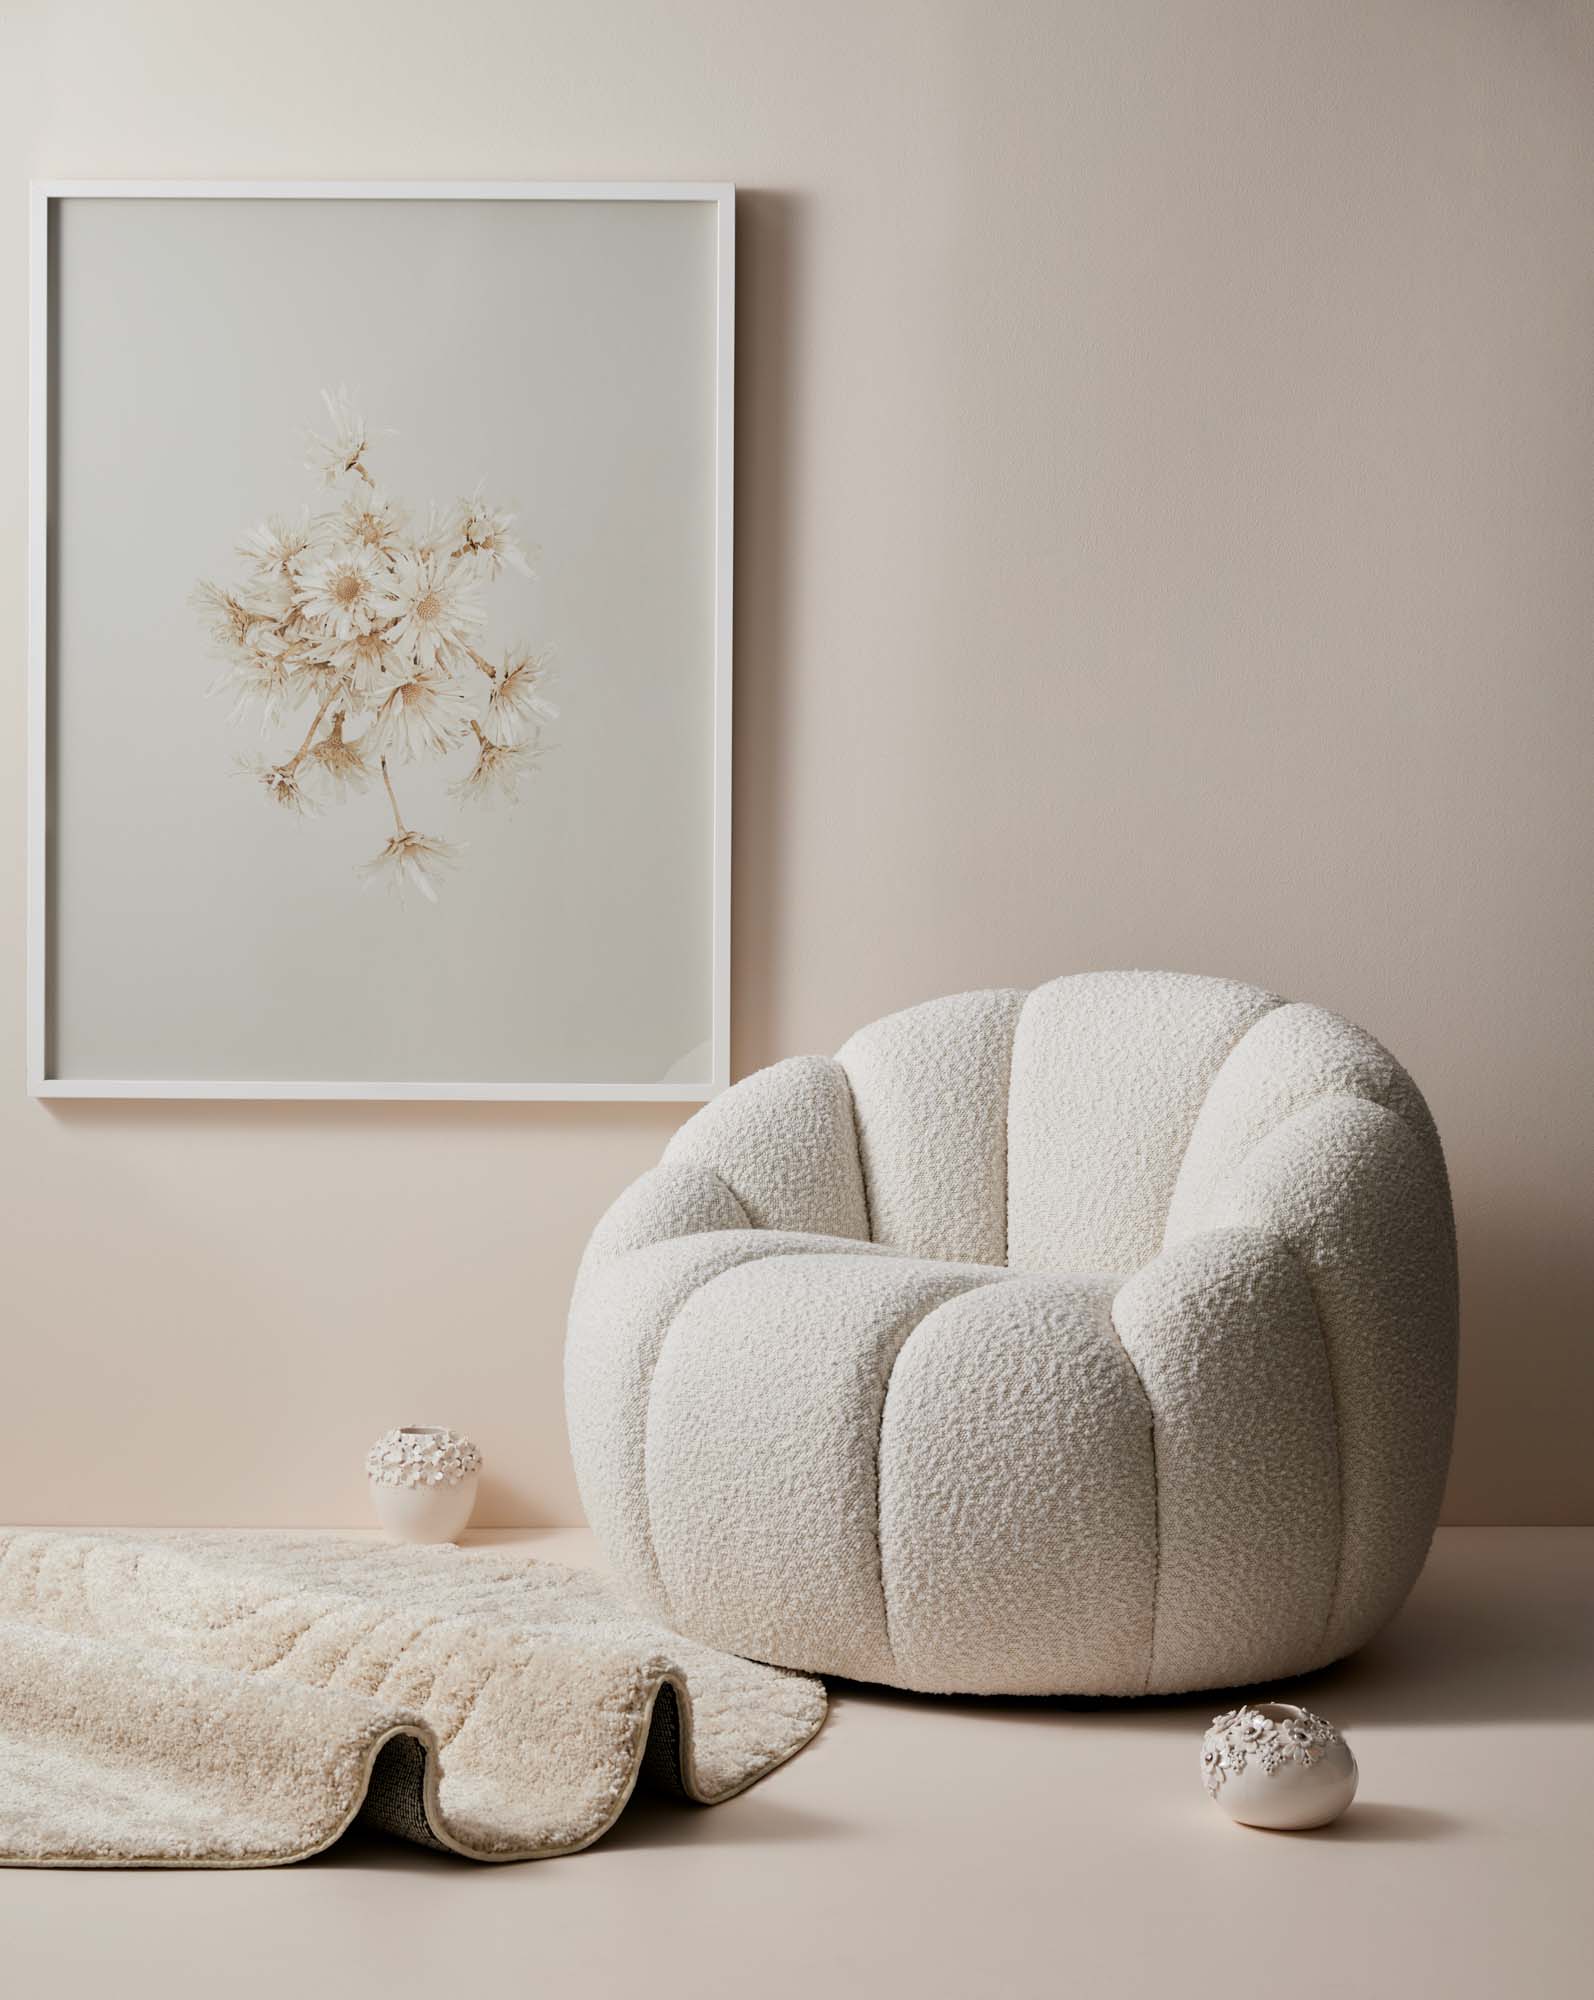 soft white walls with boucle rounded chair and large floral art on the wall and two vases on the floor